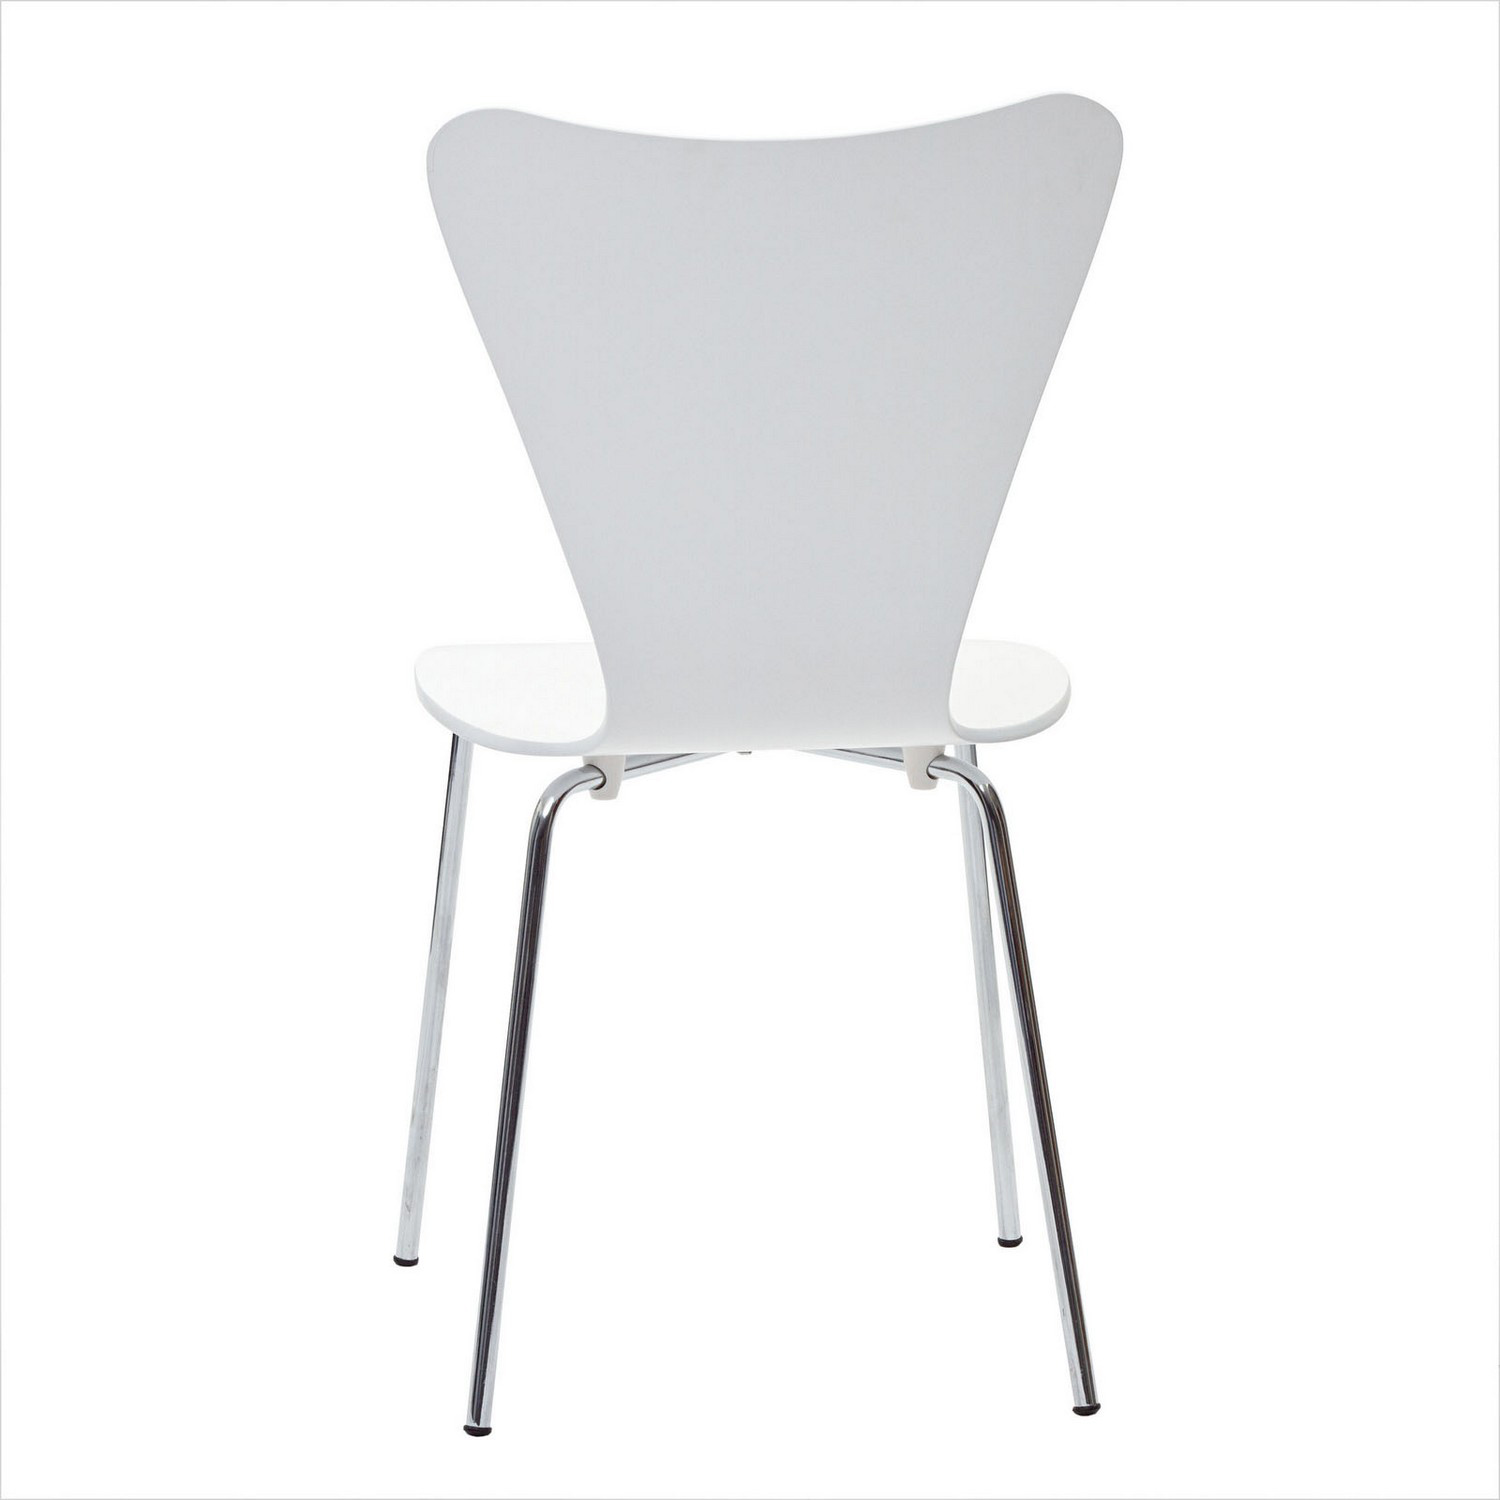 Modway Ernie Dining Side Chair - White